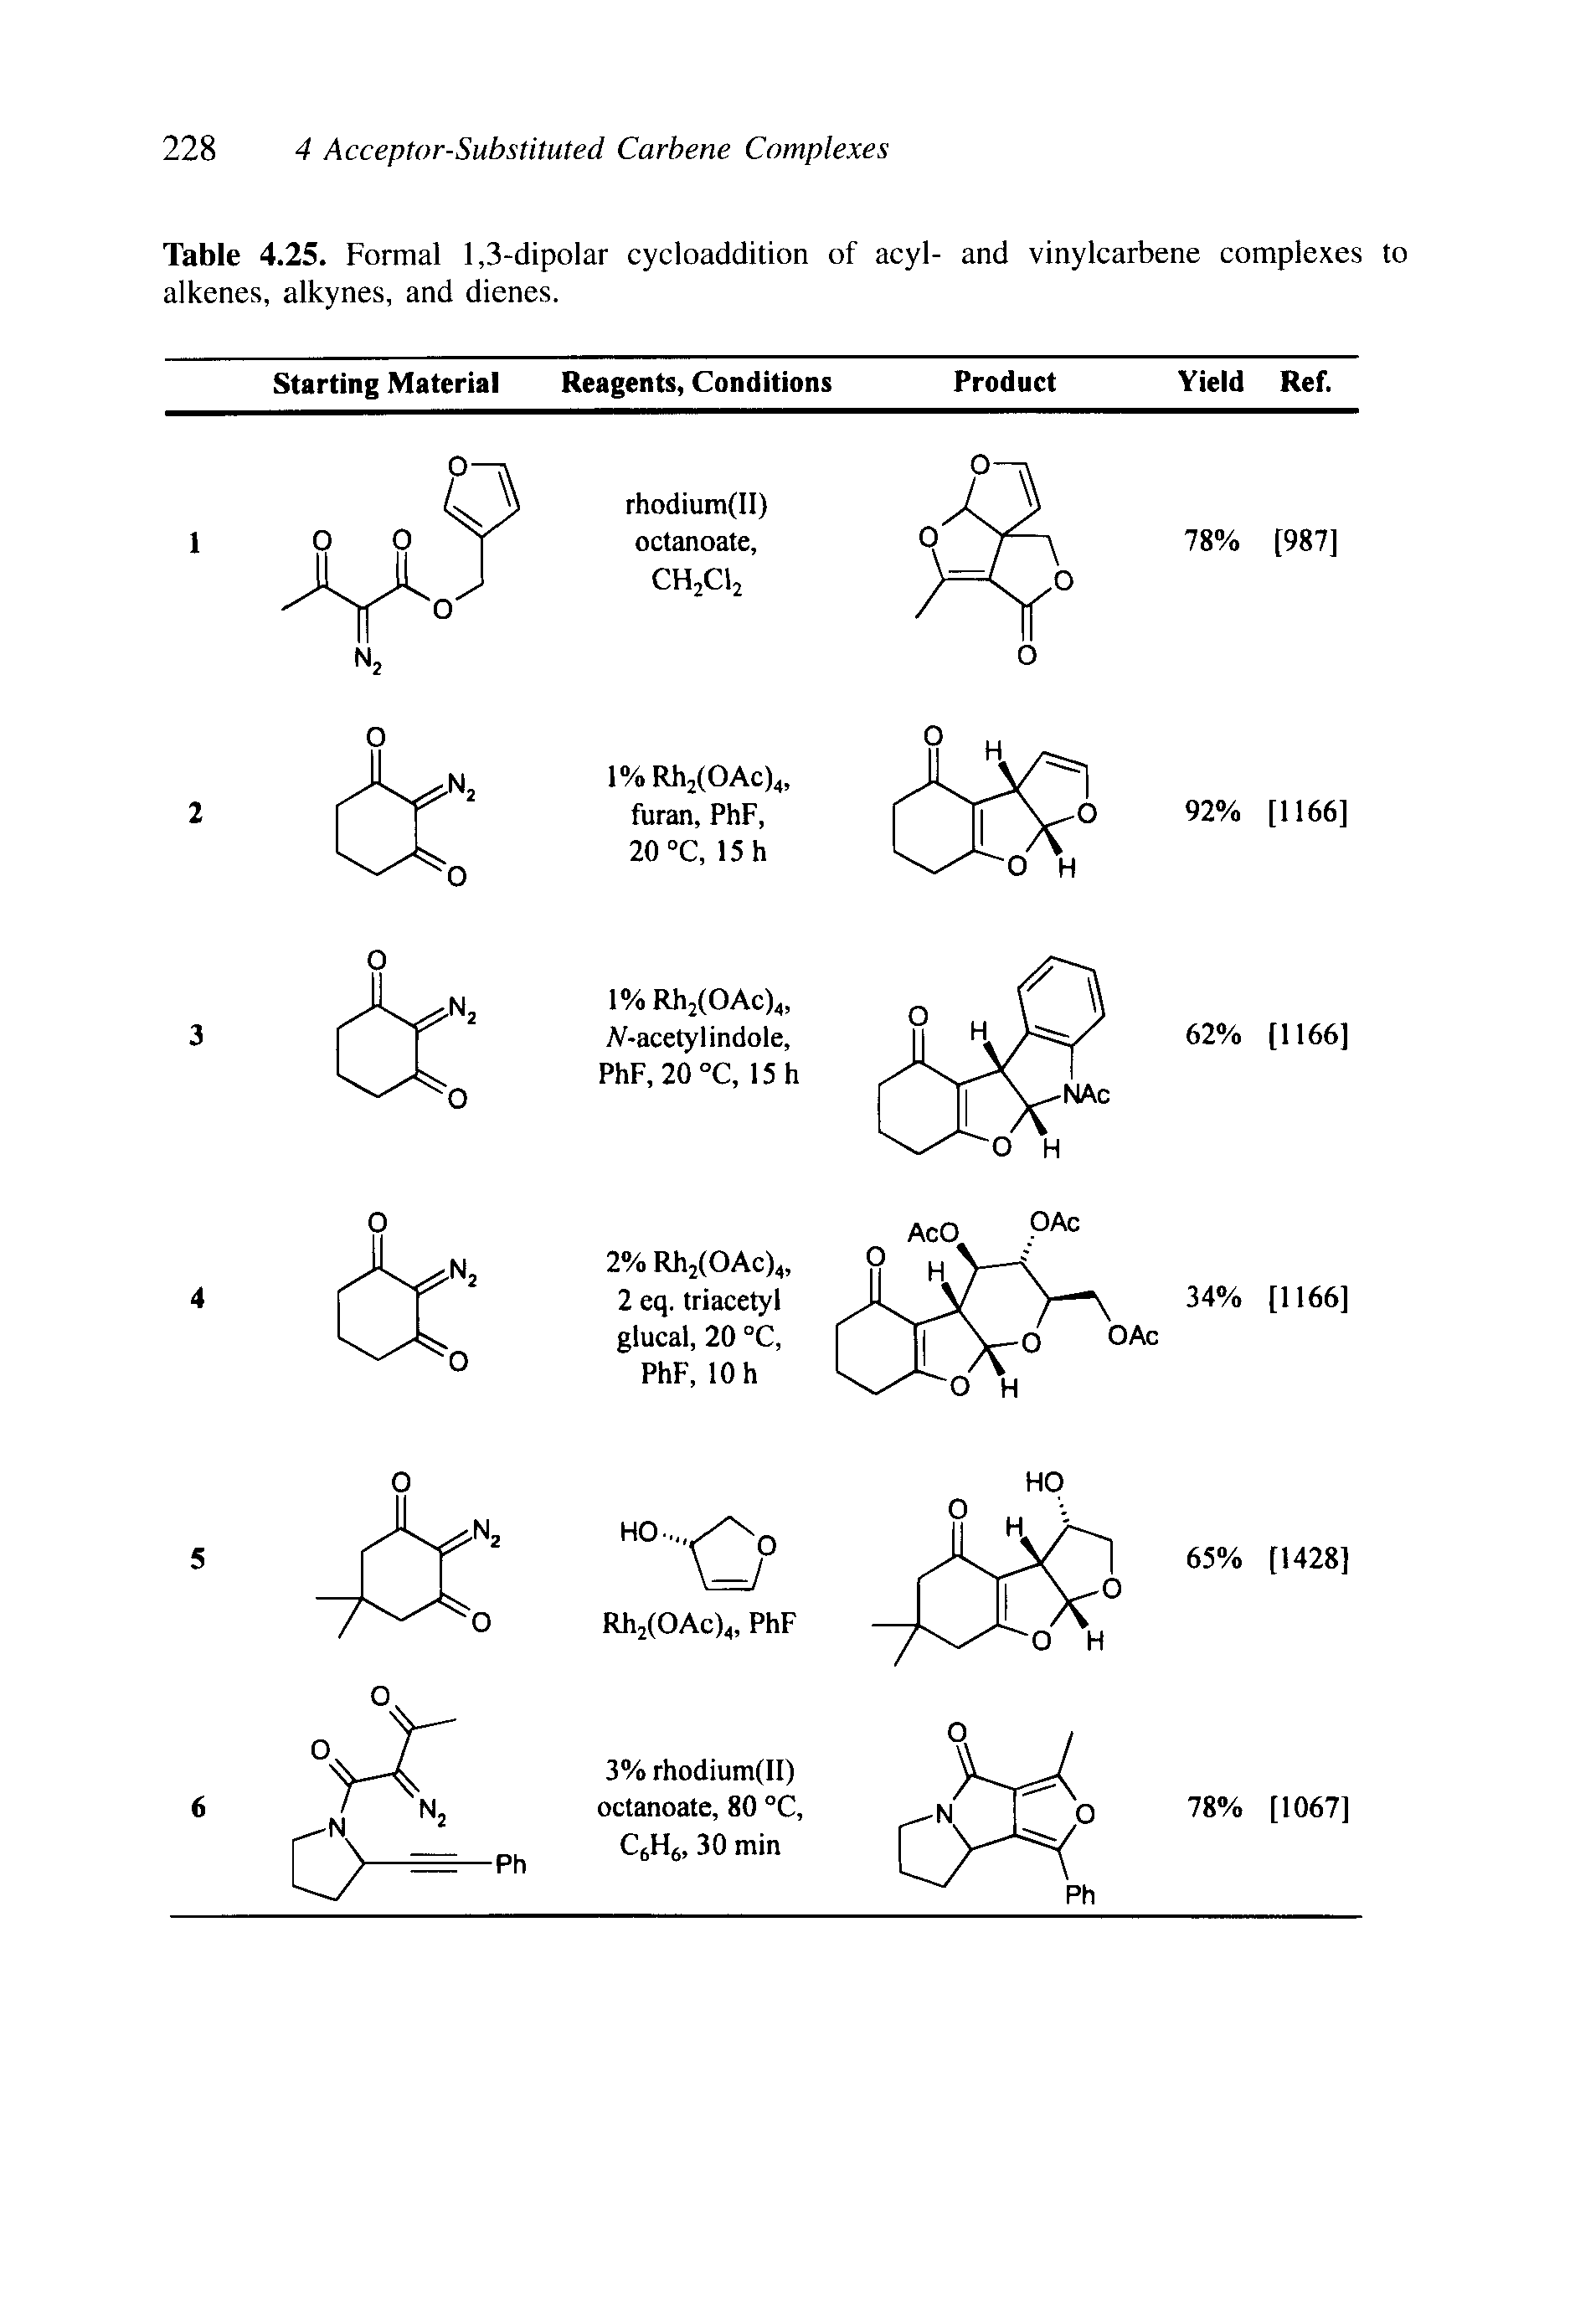 Table 4.25. Formal 1,3-dipolar cycloaddition of acyl- and vinylcarbene complexes to alkenes, alkynes, and dienes.